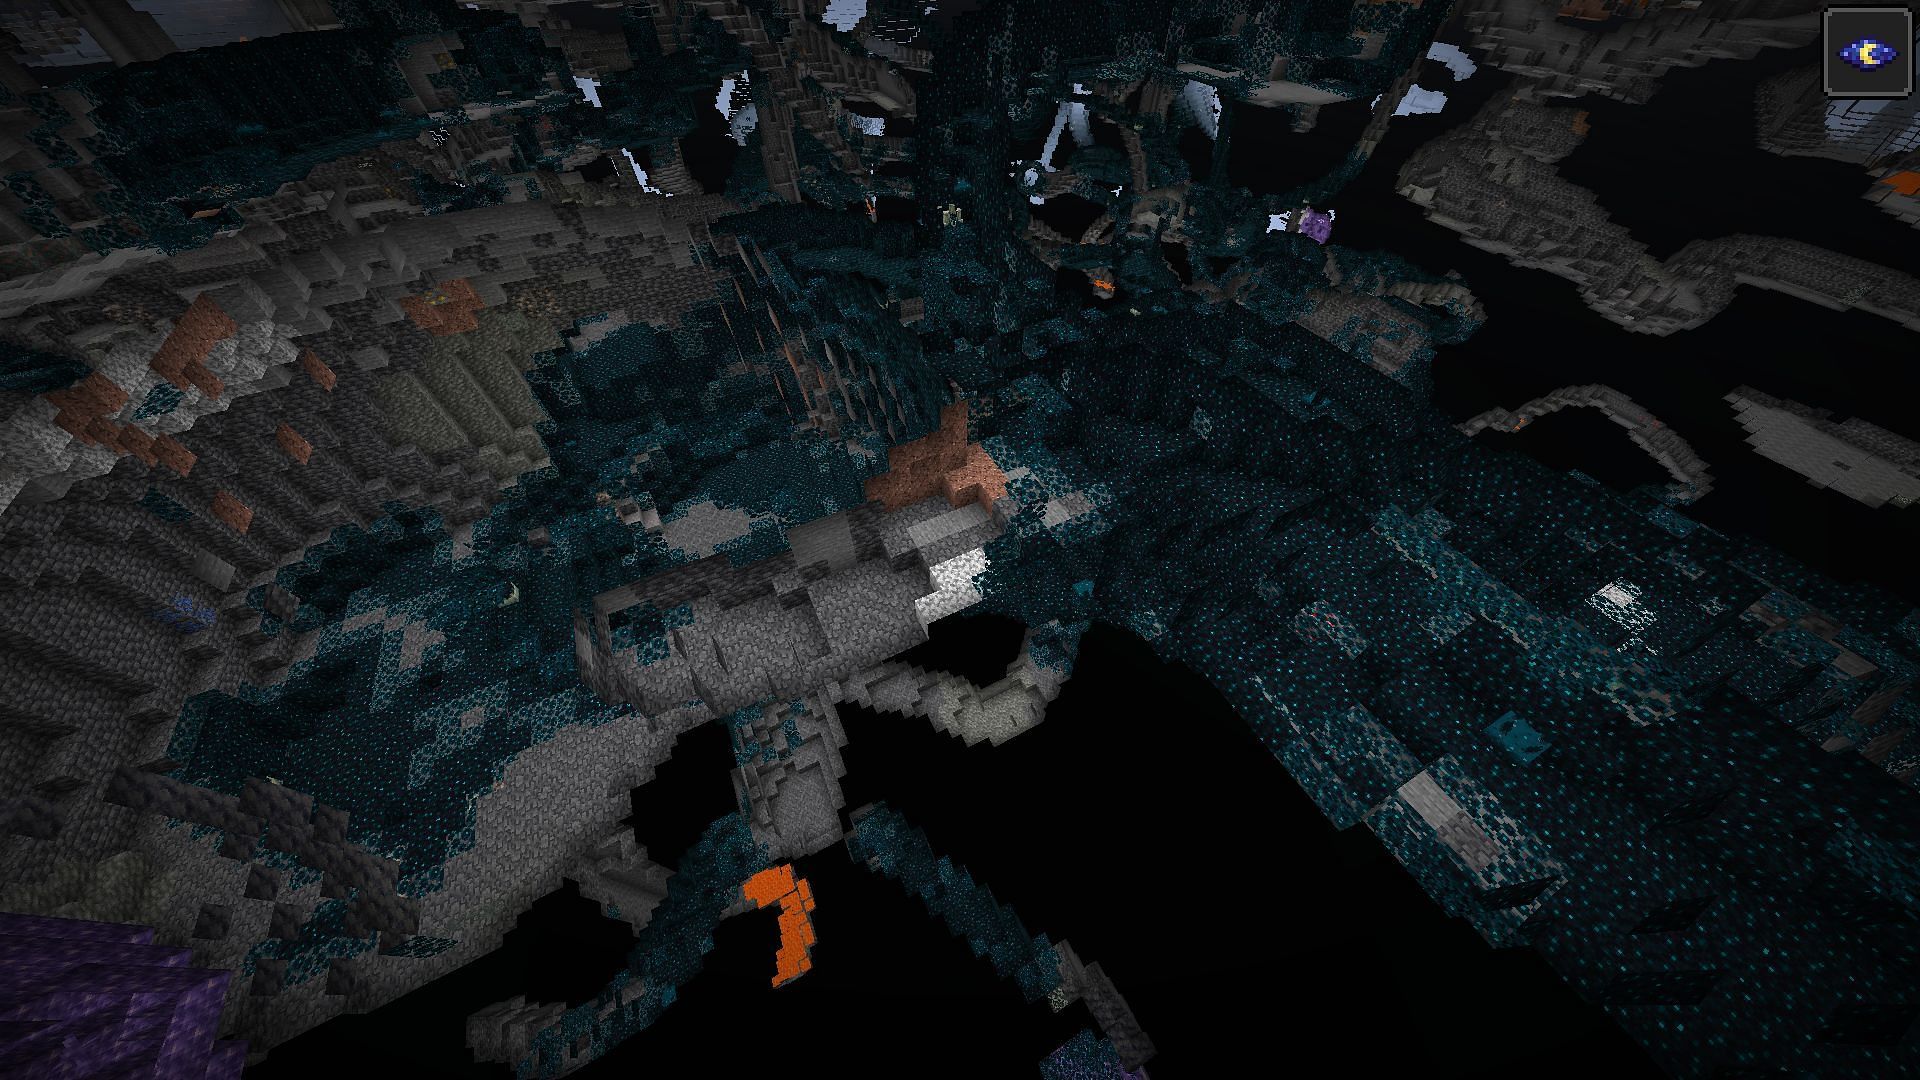 This biome will generate anywhere below Y level 0 (Image via Mojang)